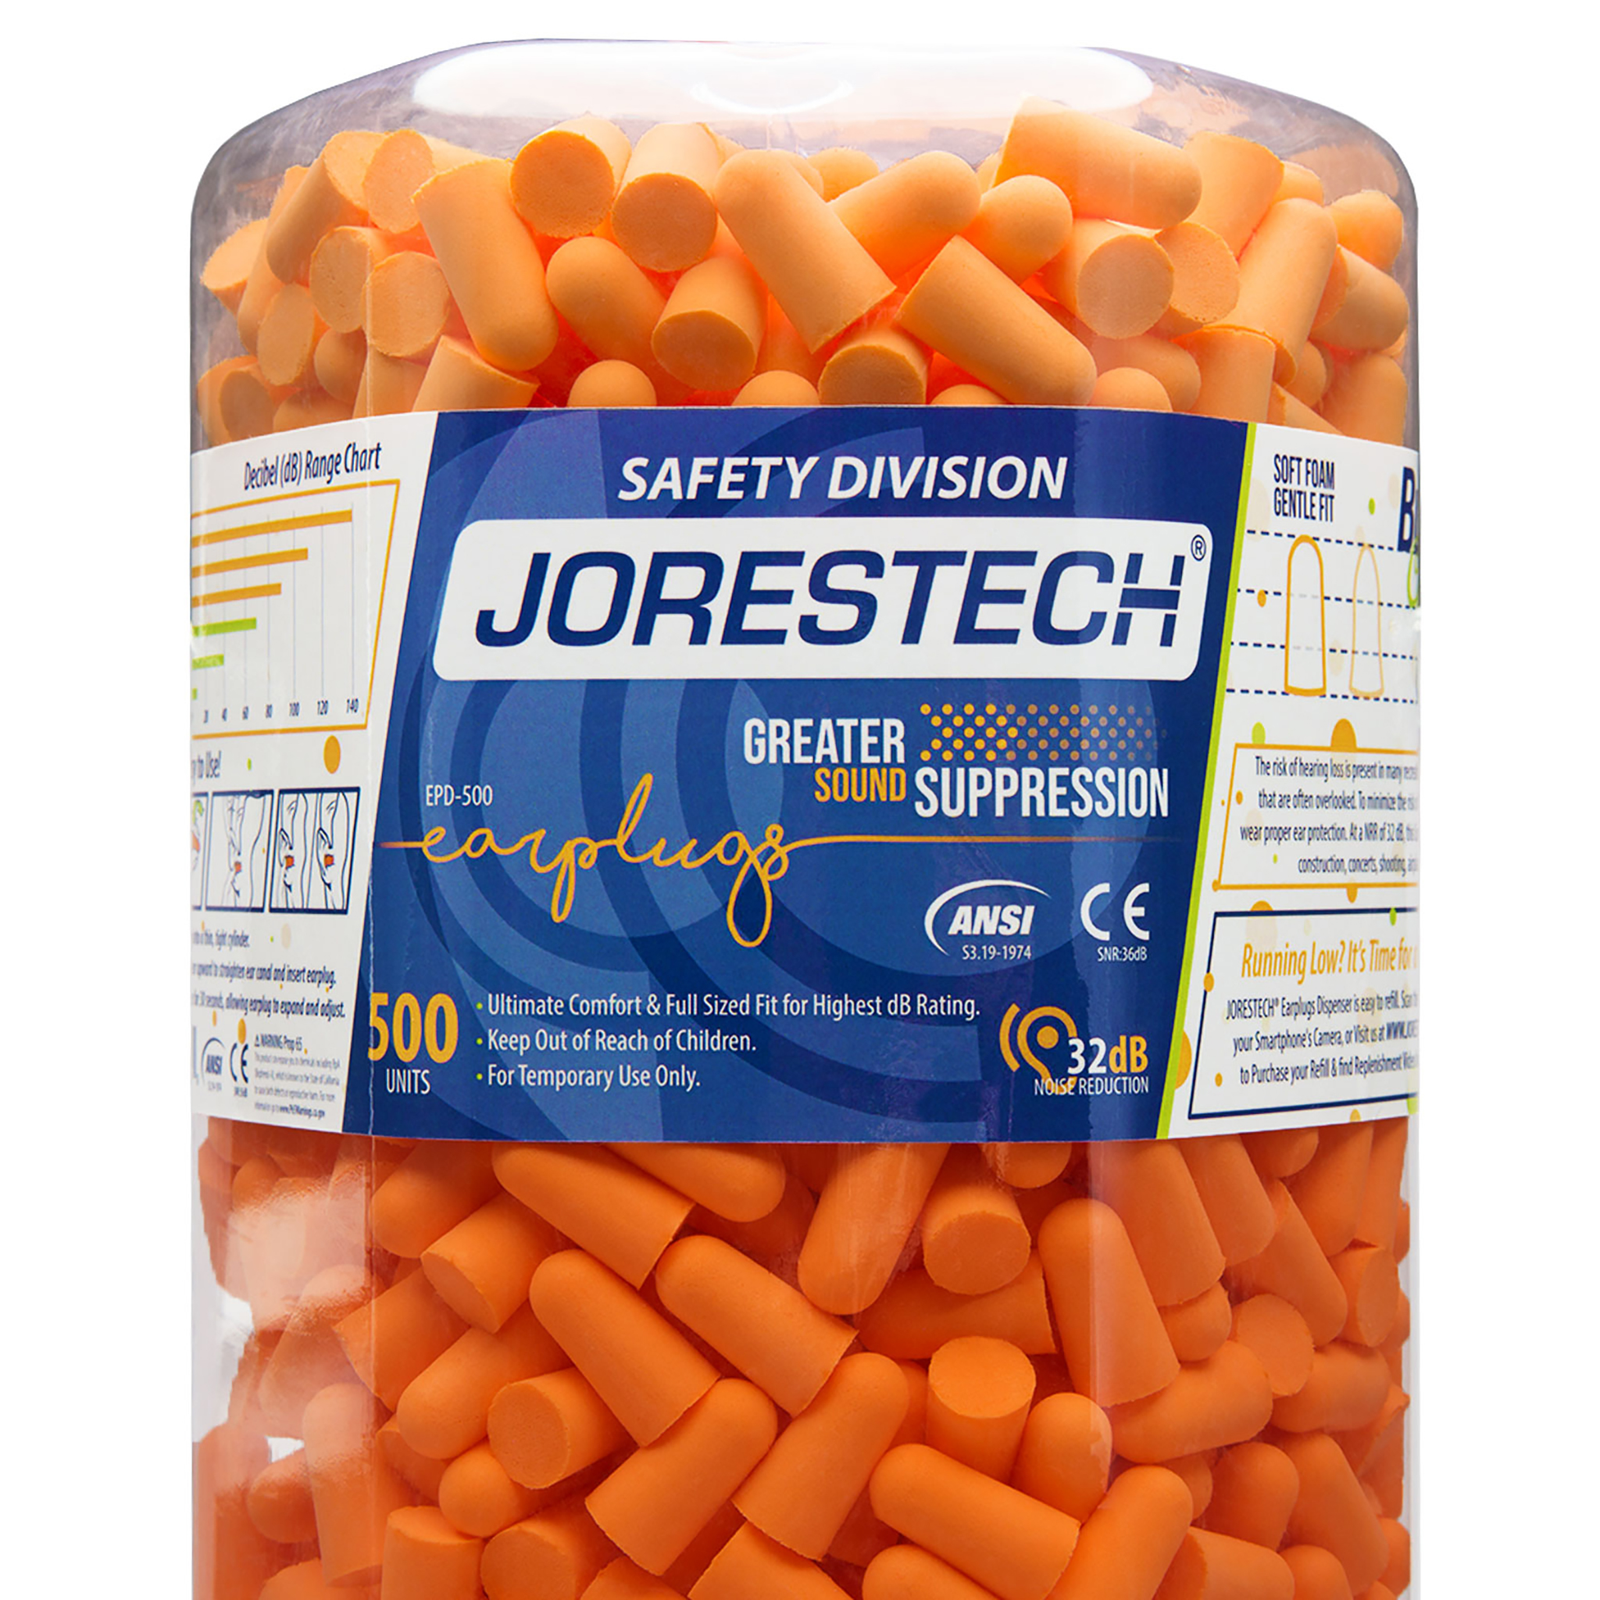 Close up view shows a JORESTECH® earplug clear dispenser station with 500 orange ultra foam ear plugs inside. Text on the sticker of the product reads: Greater sound suppression. ANSI, CE, 32DB Noise Reduction EPD-500